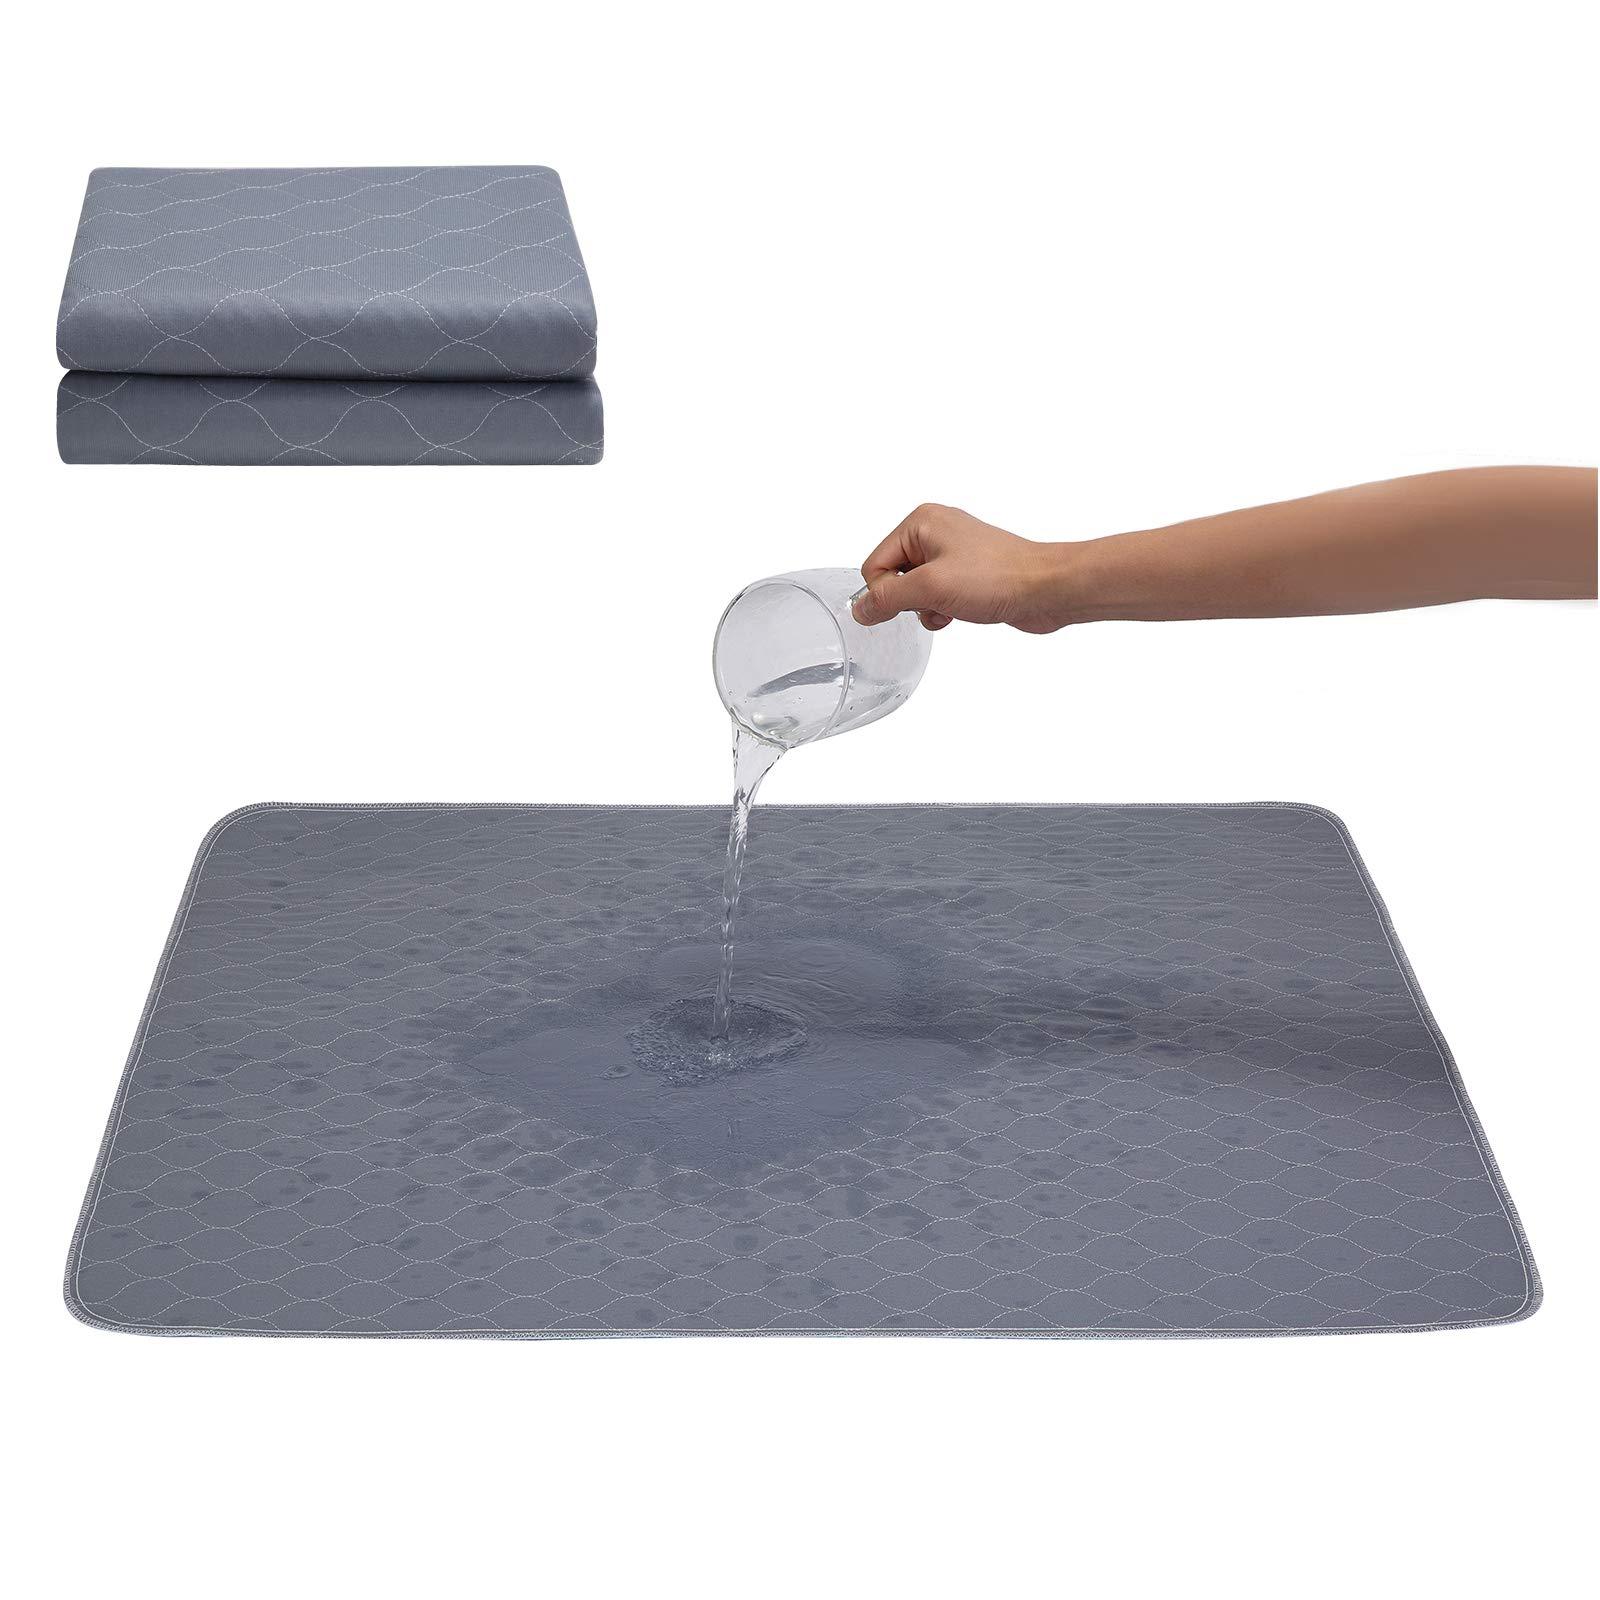 JdPet Washable Dog Pee Pads+Free Grooming Gloves - Reusable Whelping Pads,Waterproof Dog Mat Non-Slip Puppy Potty Training Pads for Dogs, Cats, Bunny